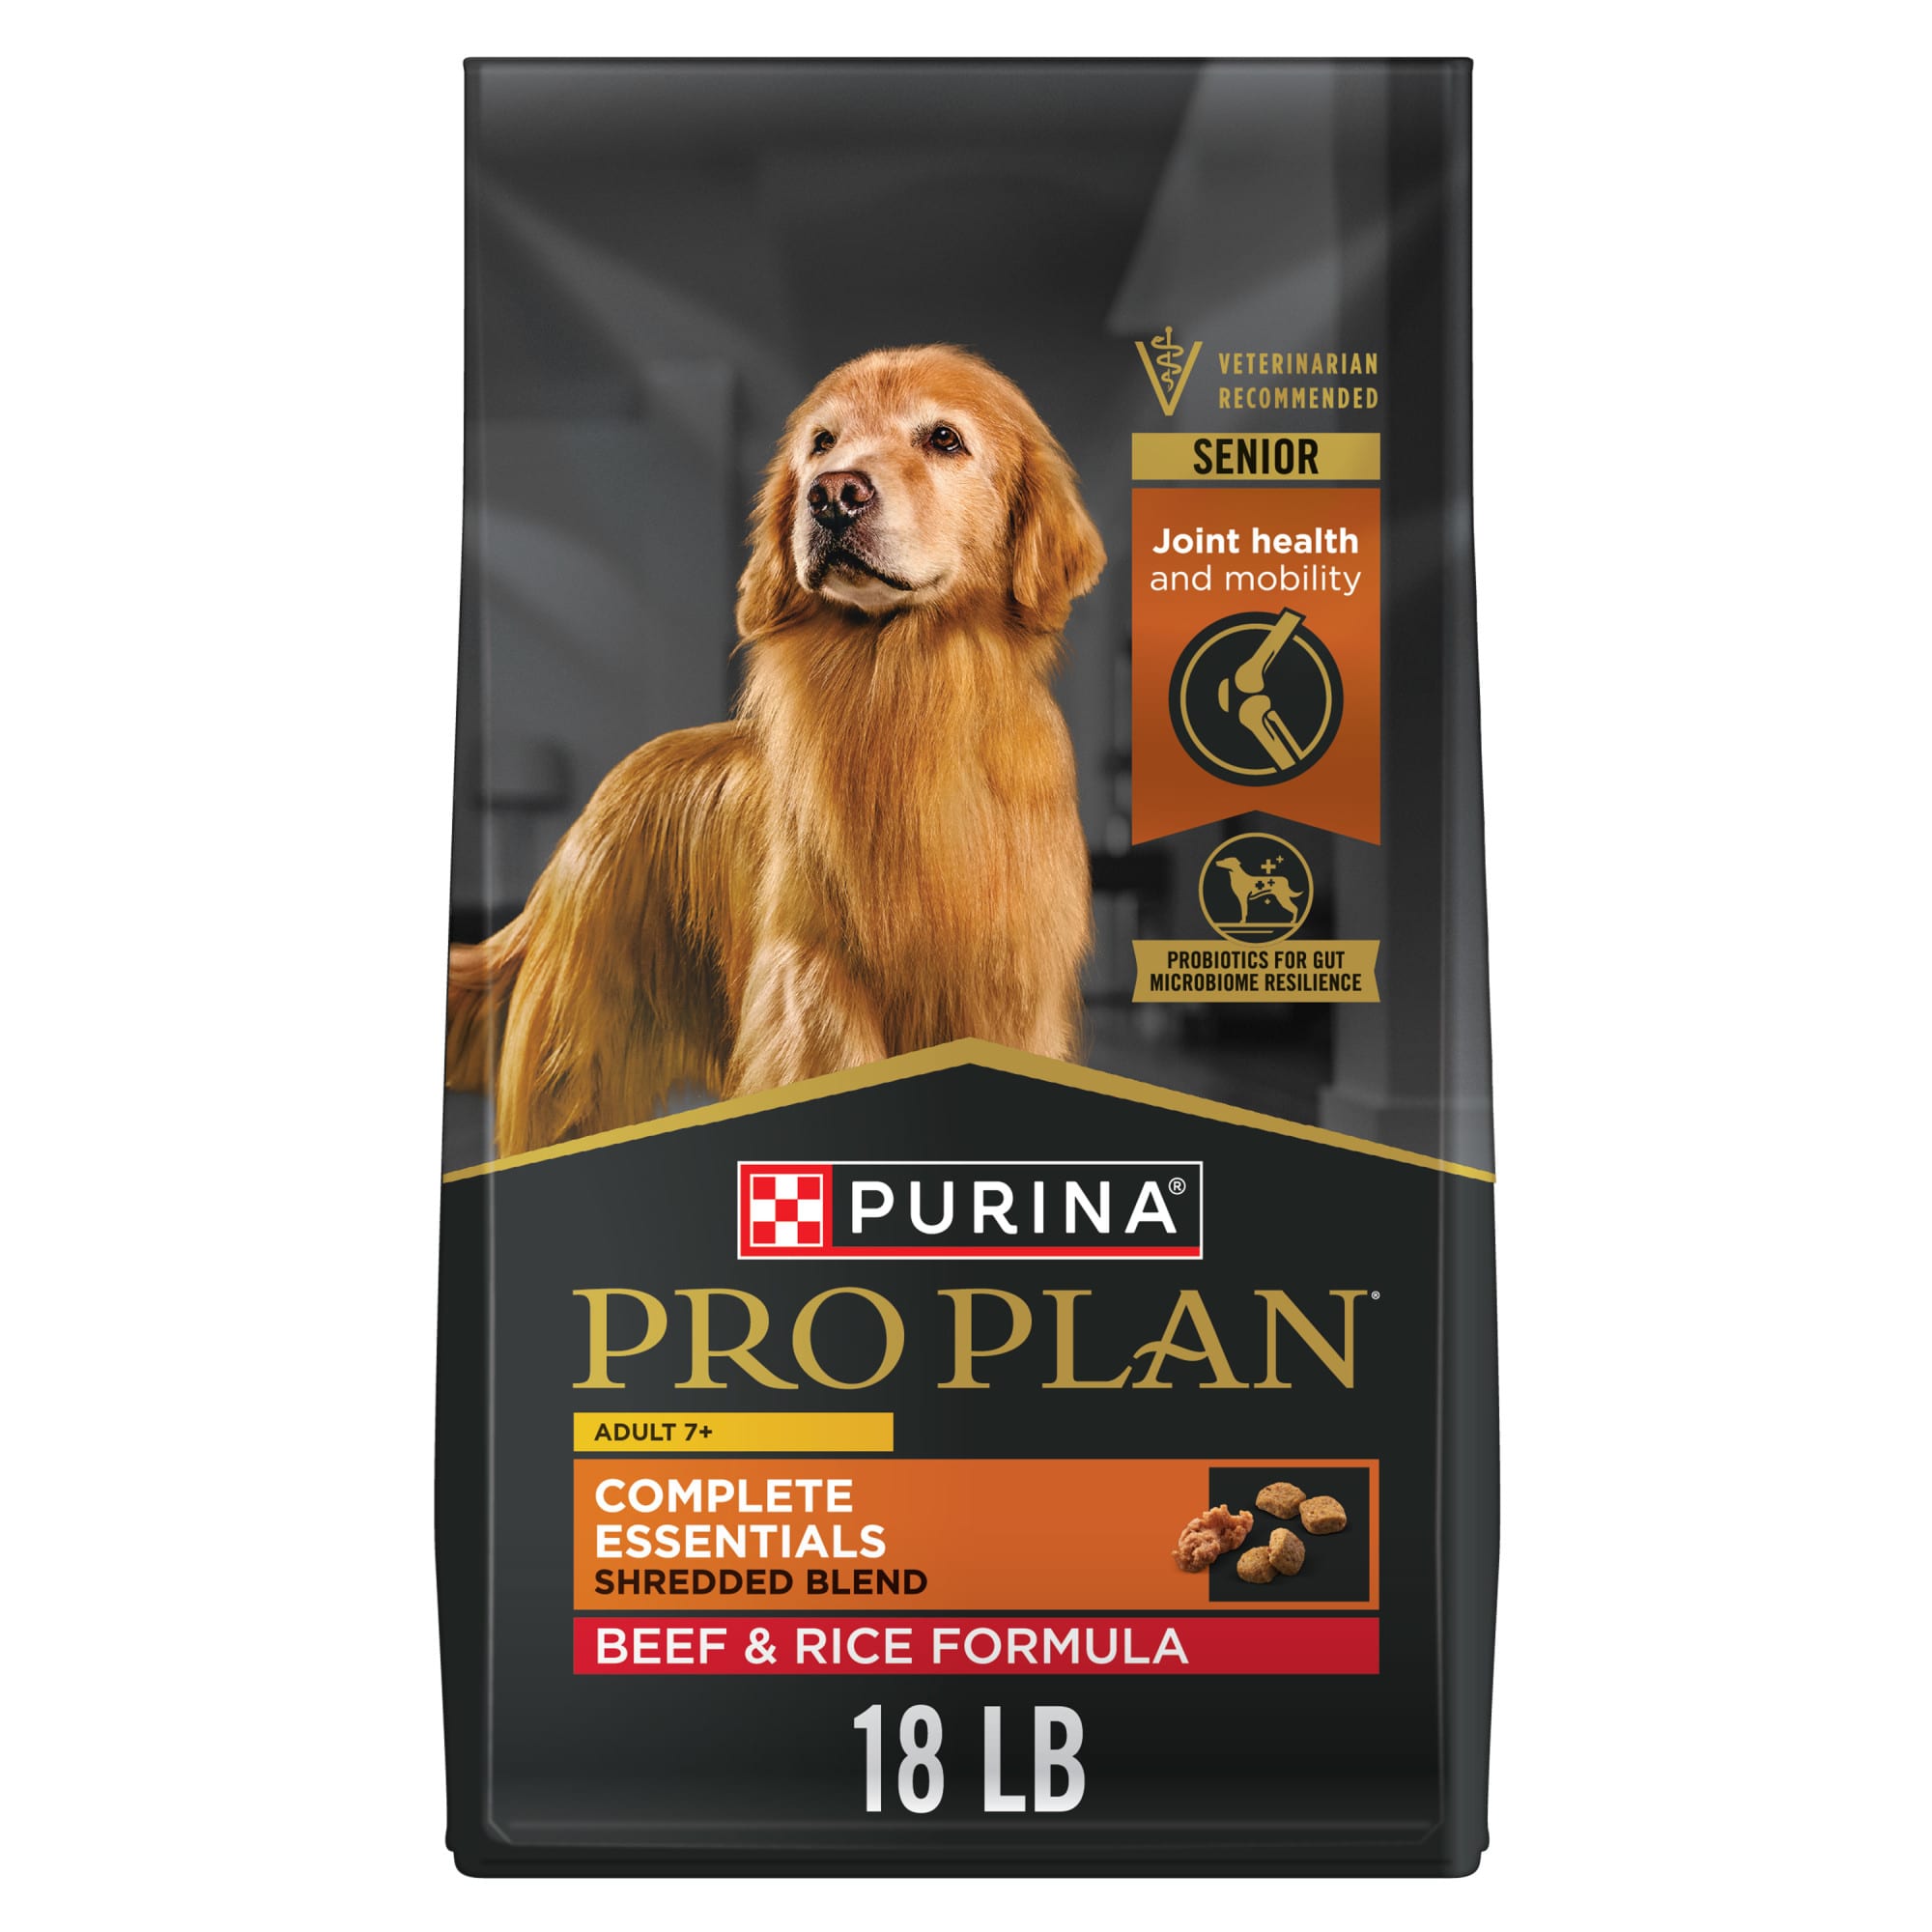 Purina Pro Plan Senior Adult 7+ Complete Essentials Shredded Blend Beef & Rice Formula High Protein Dog Food, Size: 18 lbs